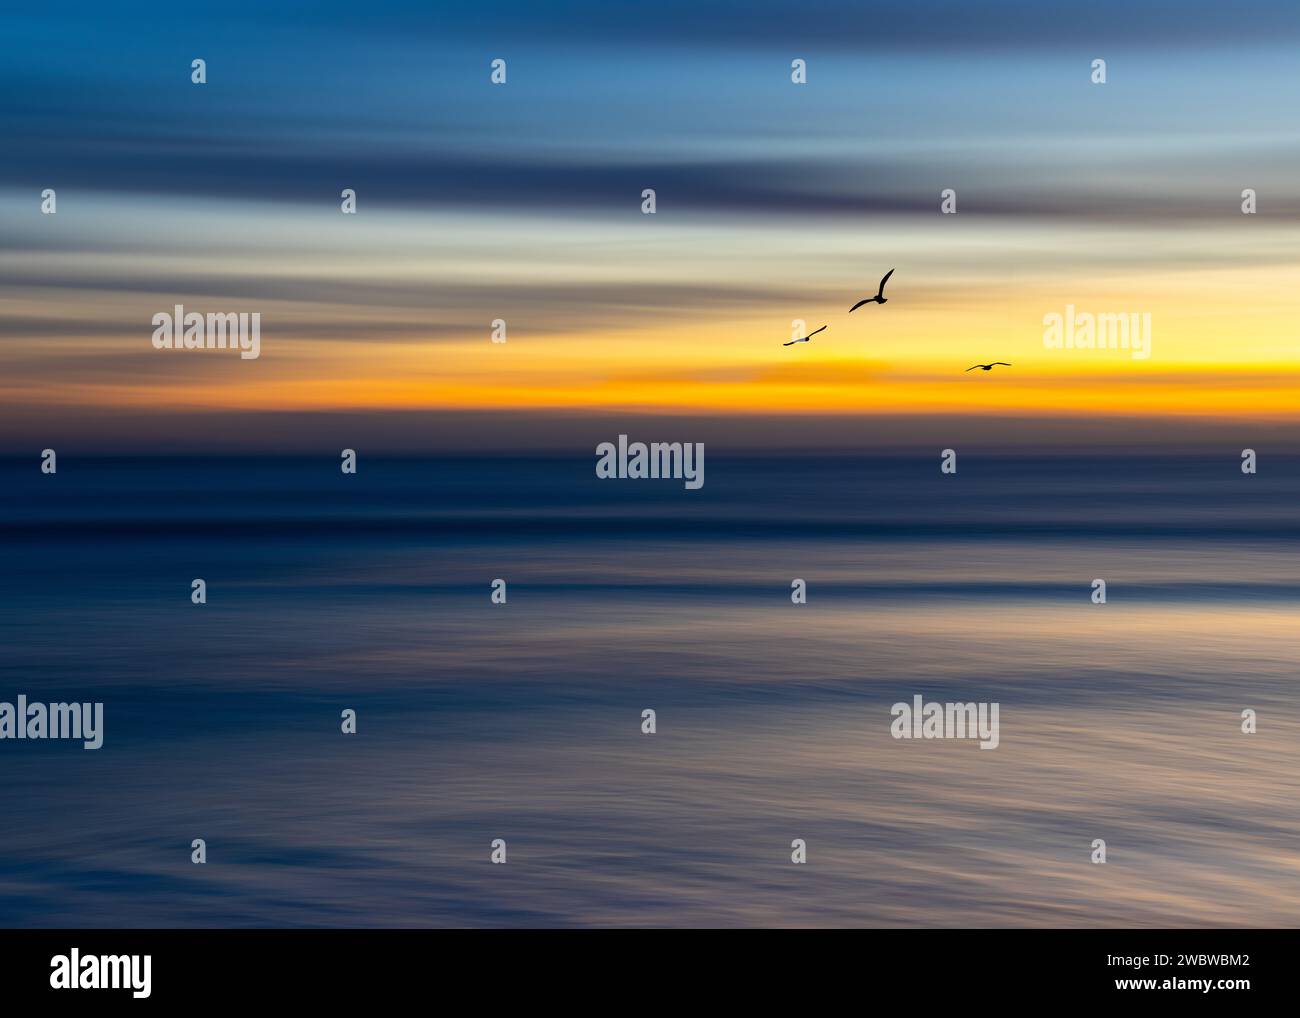 'Captivating sunset over ocean with birds in flight, perfect for travel inspiration, peaceful decor, and mindfulness apps. Stock Photo